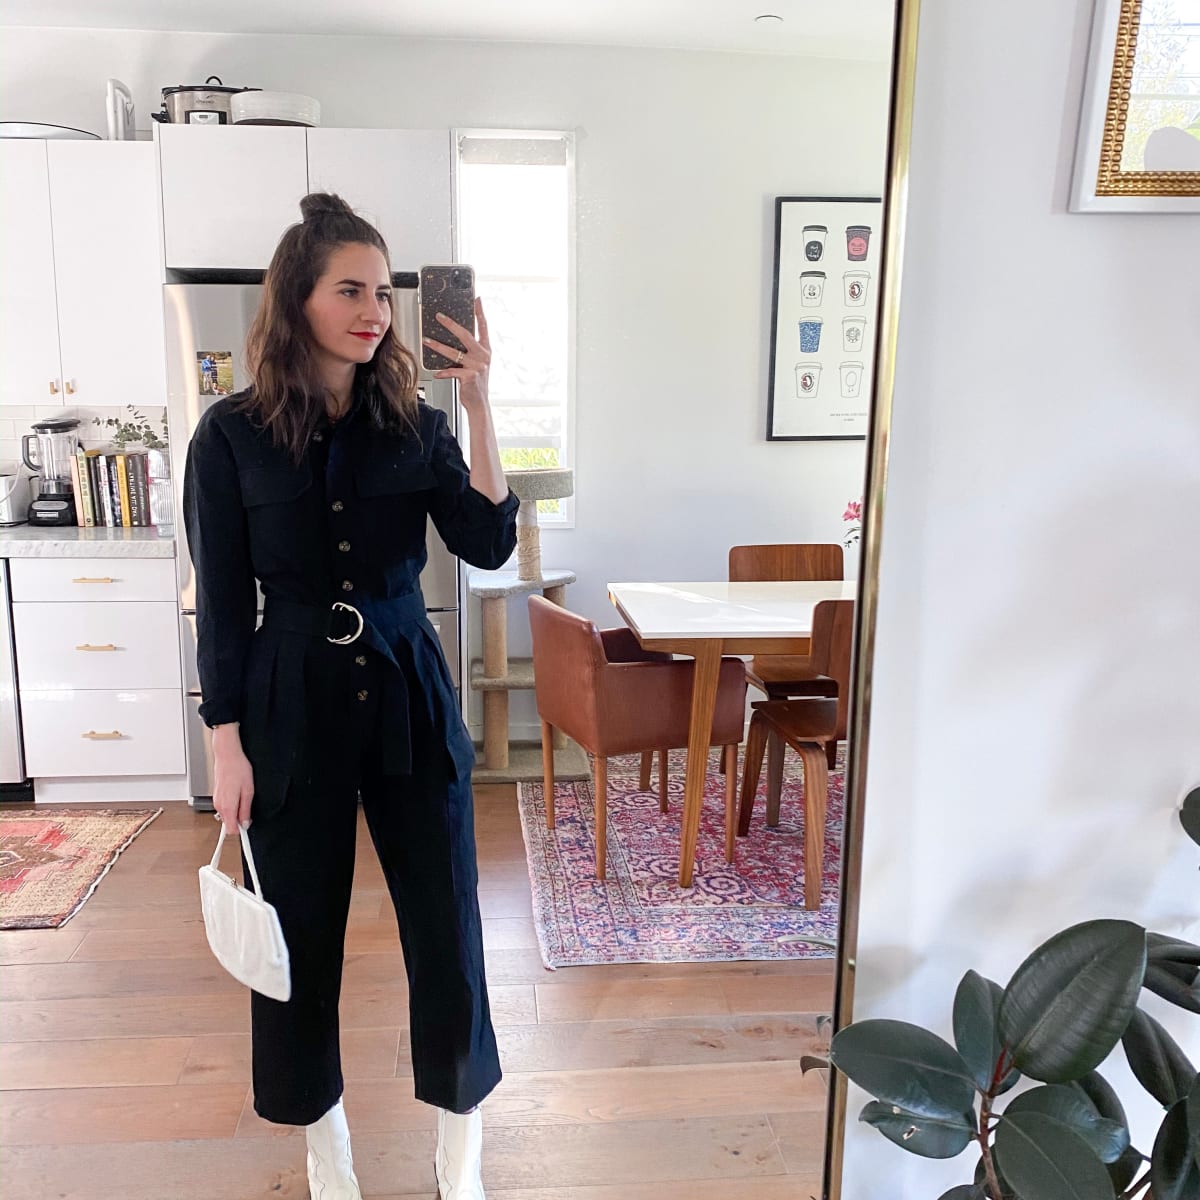 HOW TO LOOK CHIC IN A UTILITY JUMPSUIT - Awed by Monica